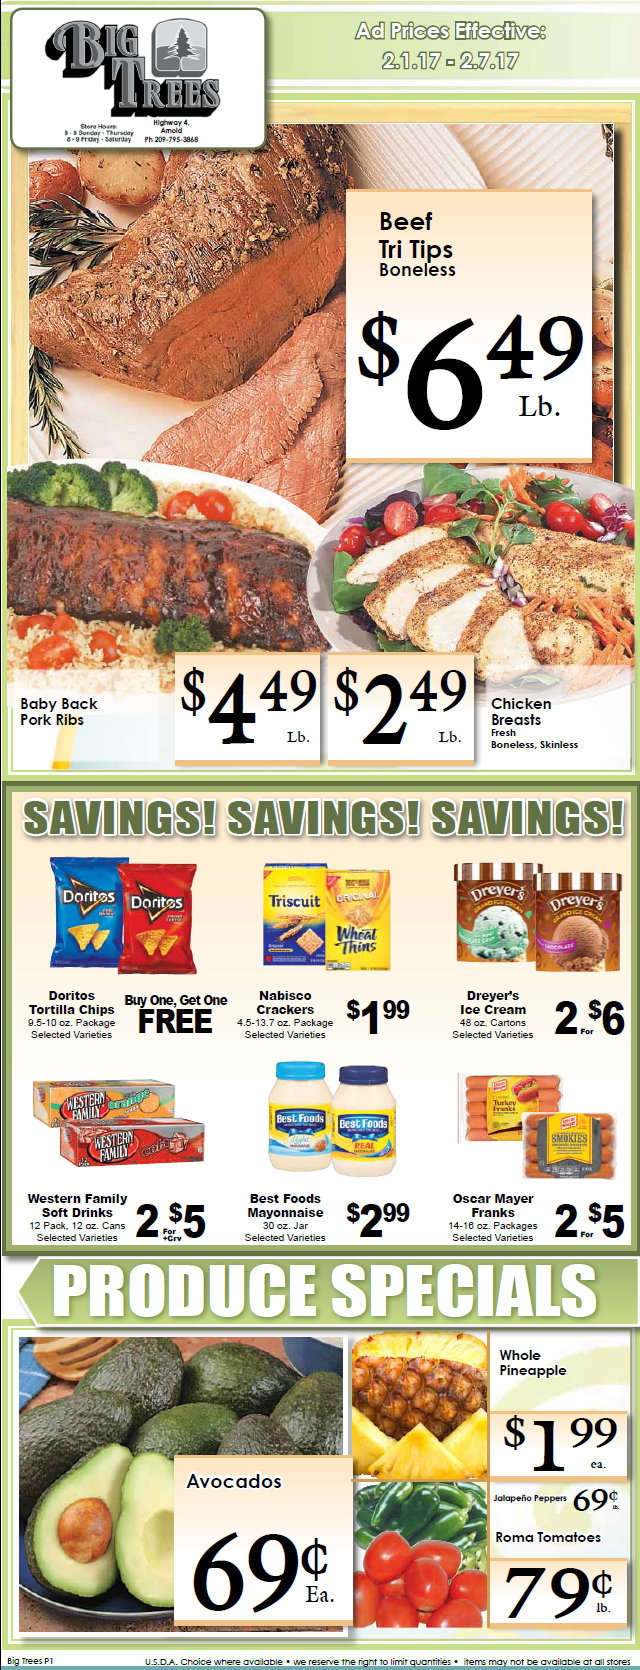 Big Trees Market Weekly Ad & Grocery Specials Through February 7th